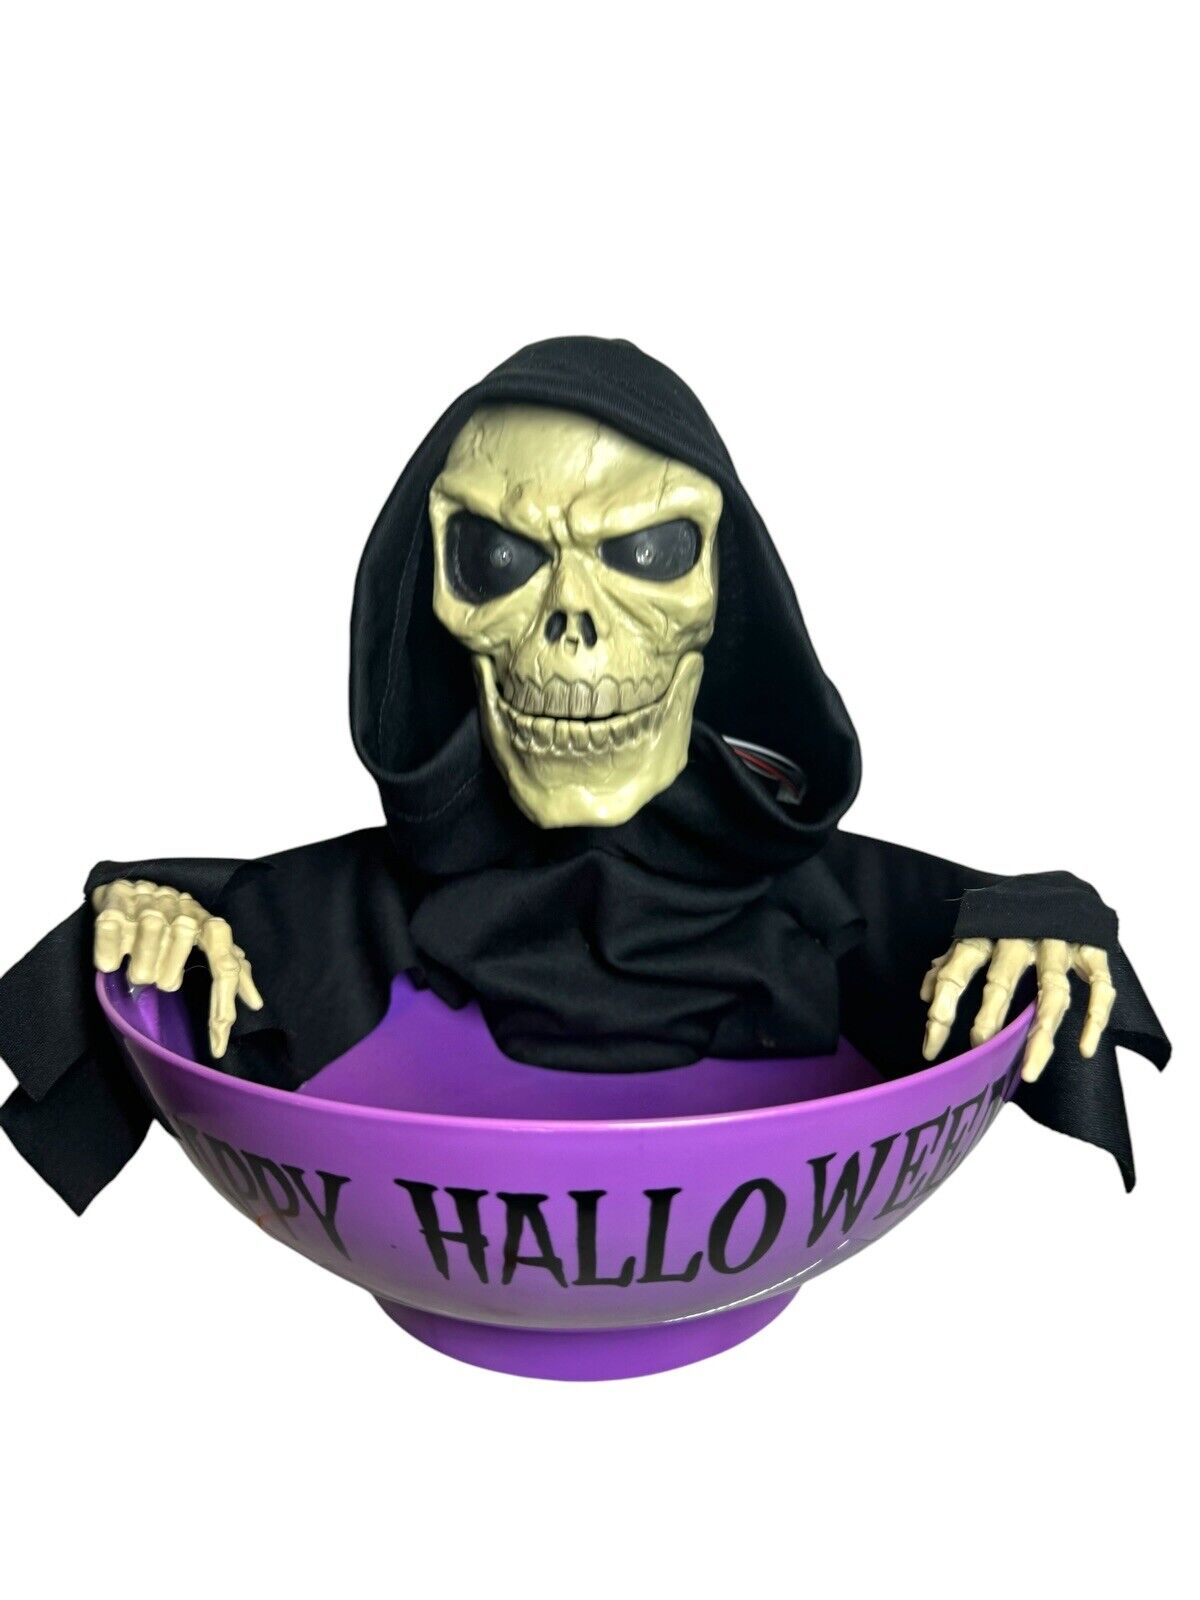 Magic Power 2007 Halloween Animated Skeleton Candy Bowl Jumpscare Light Up Sound